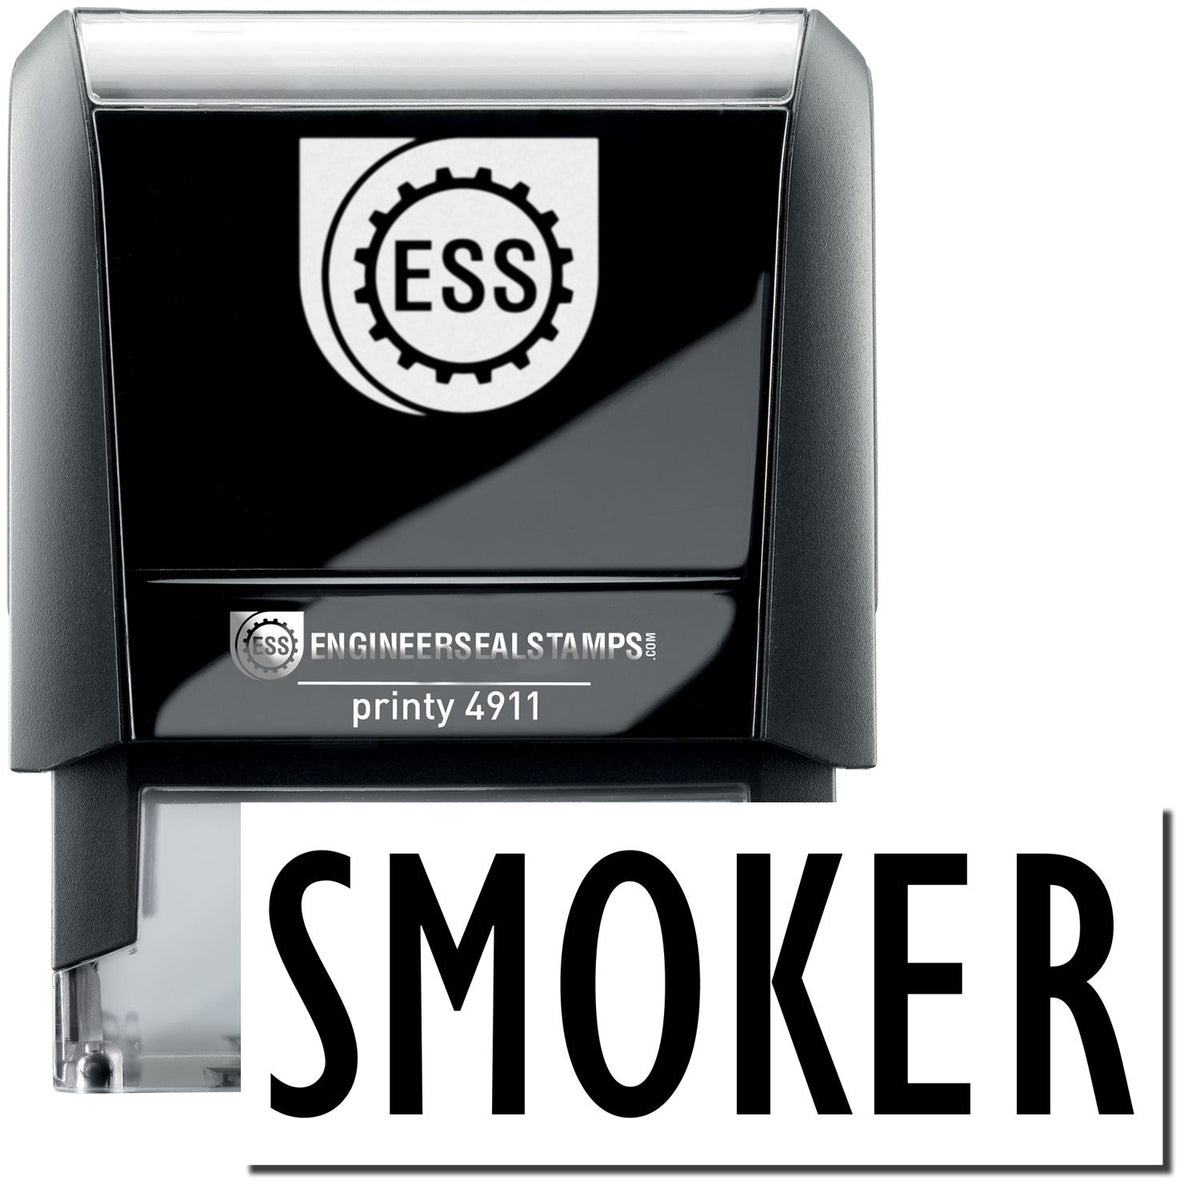 A self-inking stamp with a stamped image showing how the text &quot;SMOKER&quot; is displayed after stamping.